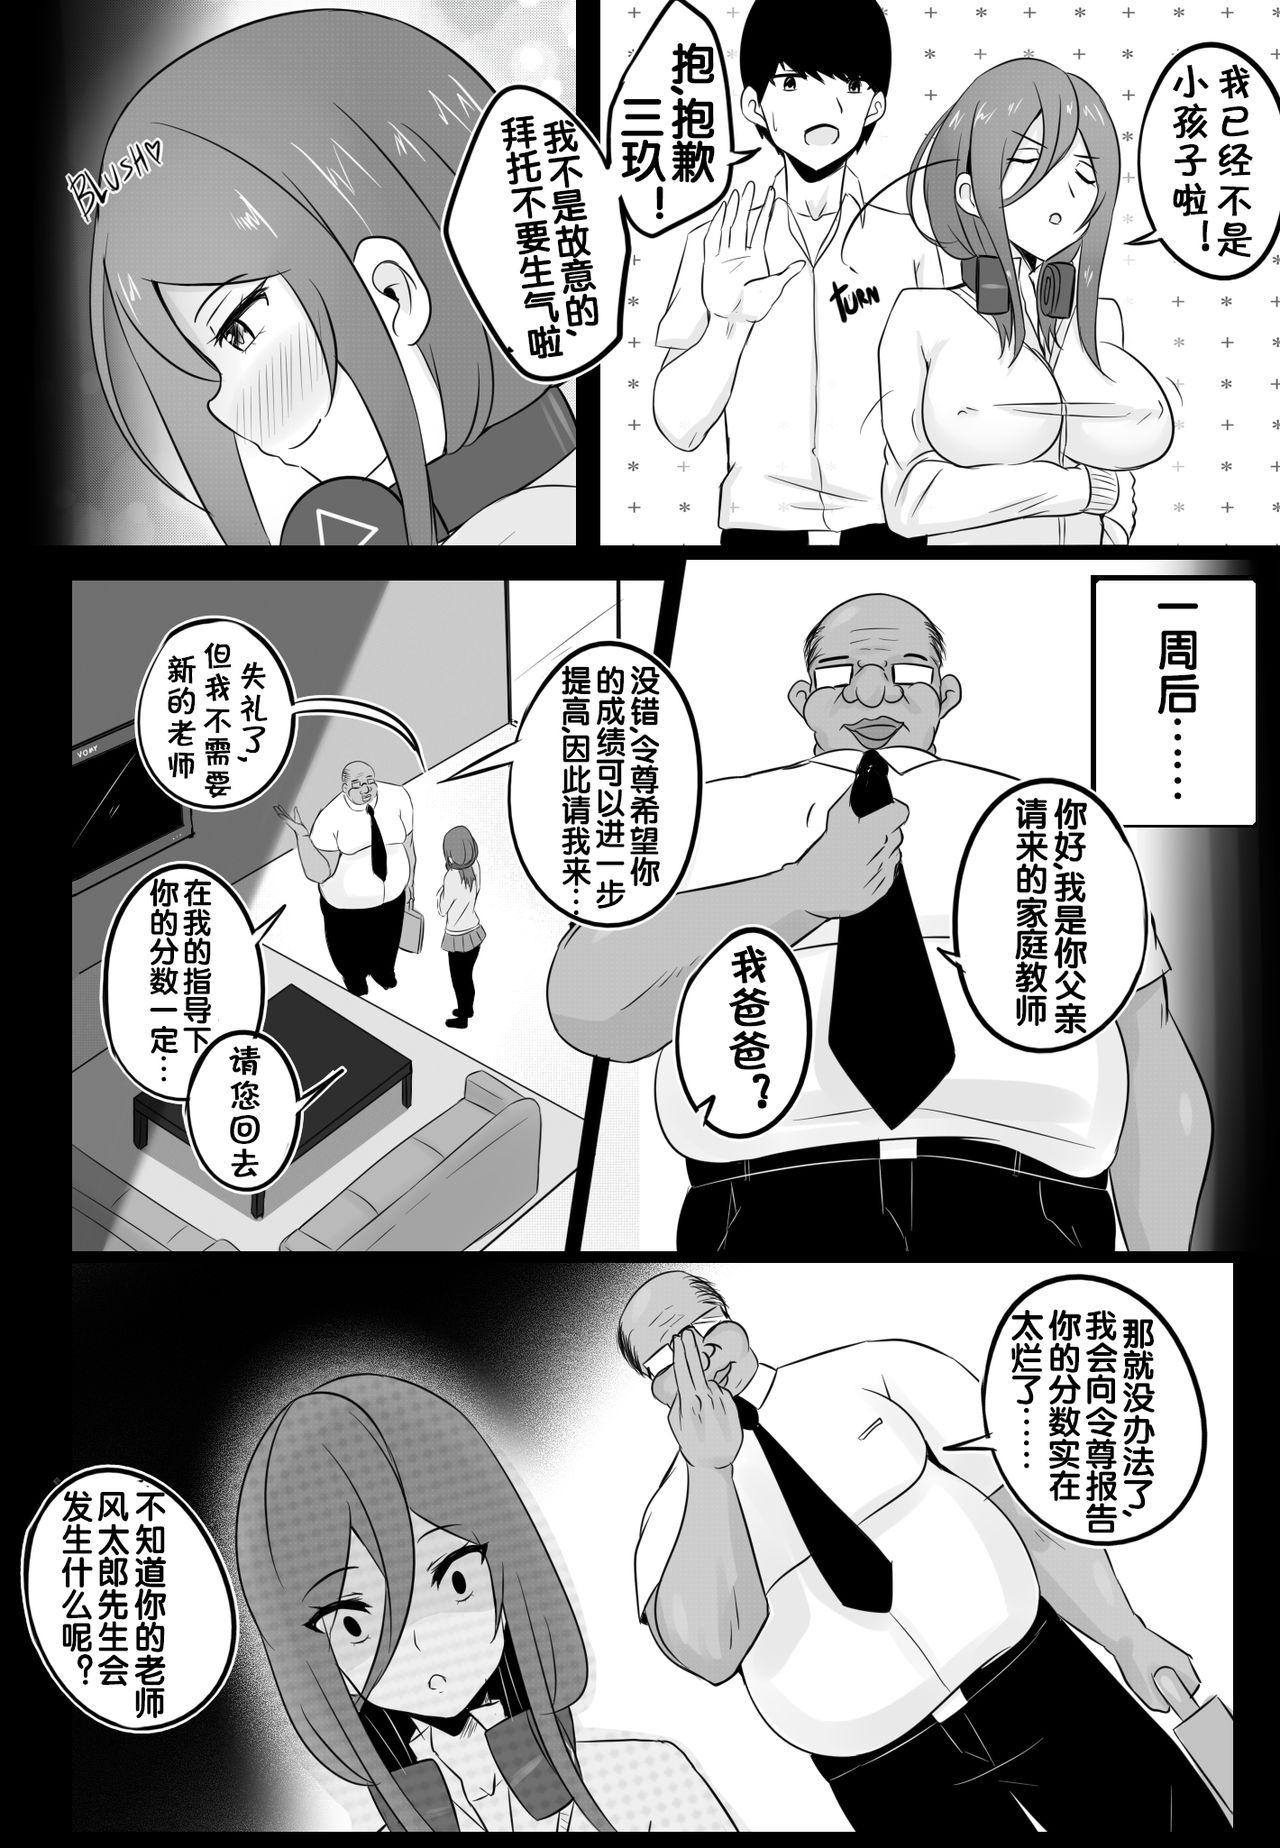 Creampies B-Trayal18 - Gotoubun no hanayome | the quintessential quintuplets Style - Page 5